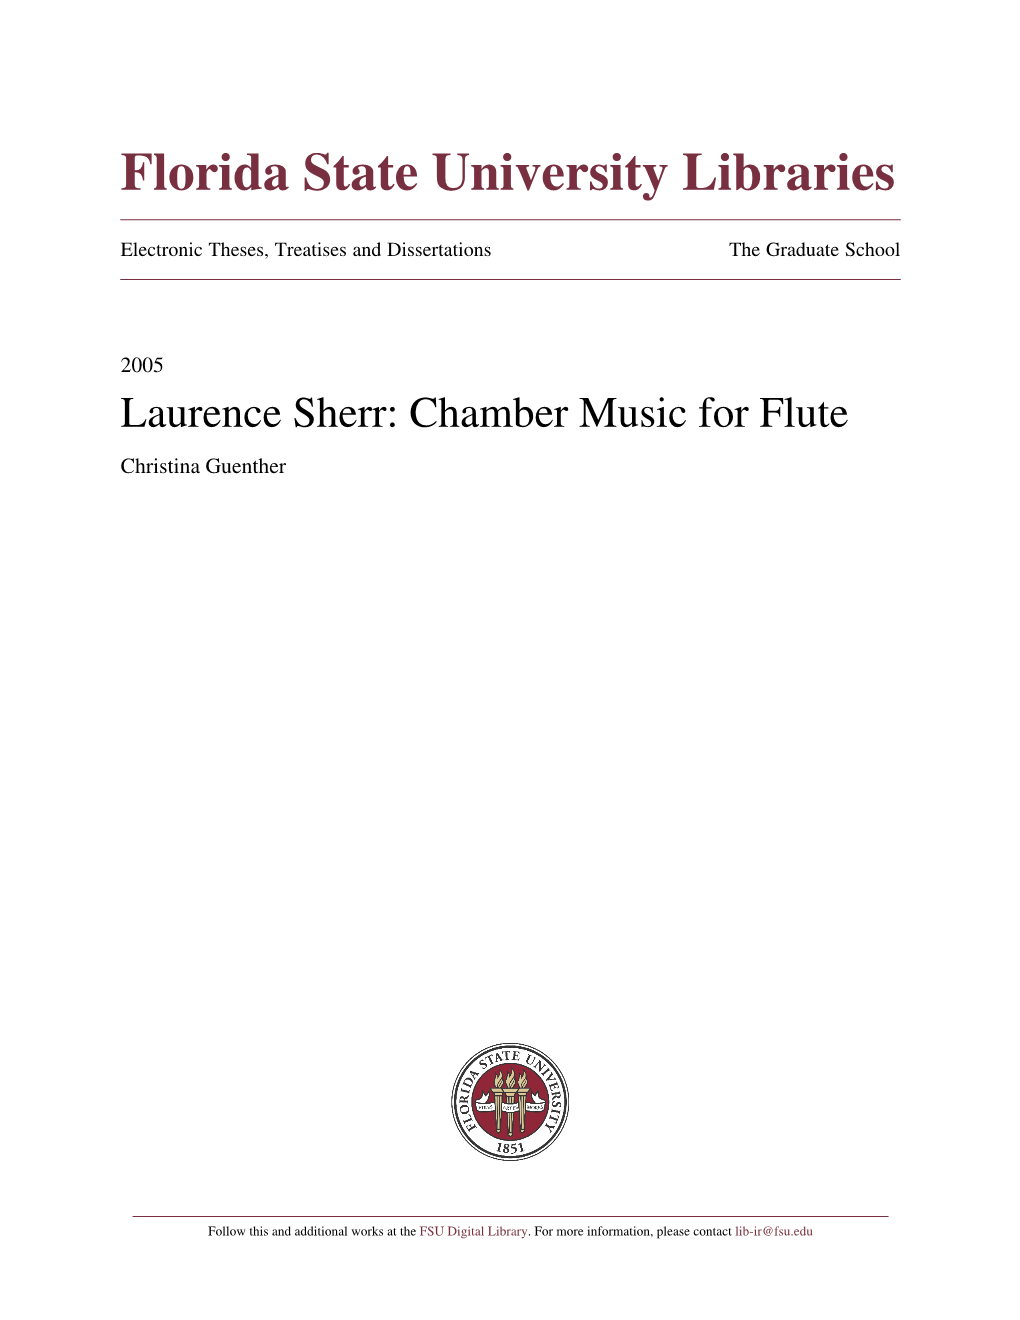 Chamber Music for Flute Christina Guenther